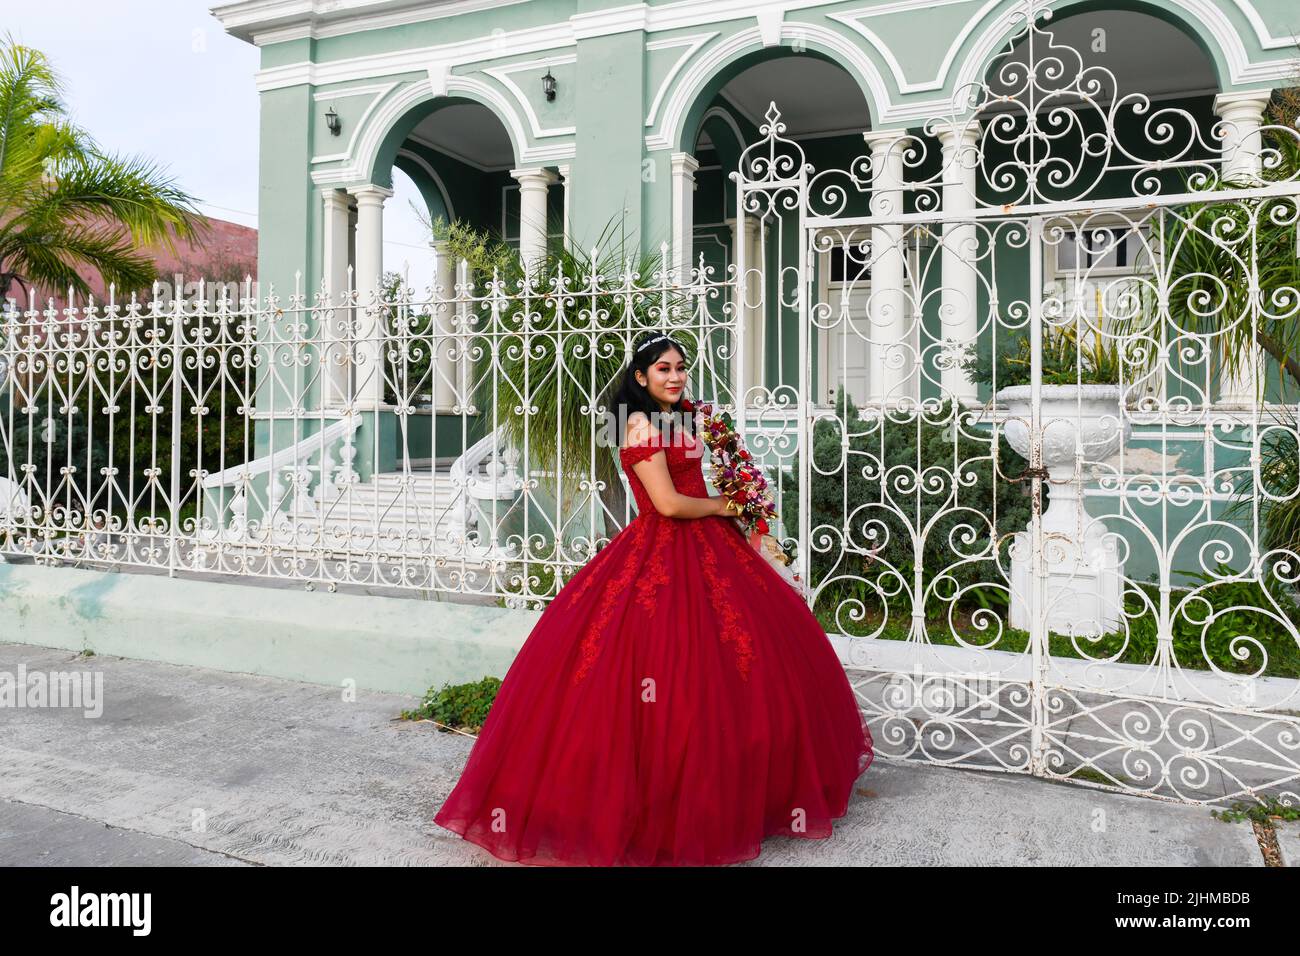 Girl celebrating her quinceañera (celebration of a girl's 15th birthday) Mexico Stock Photo - Alamy